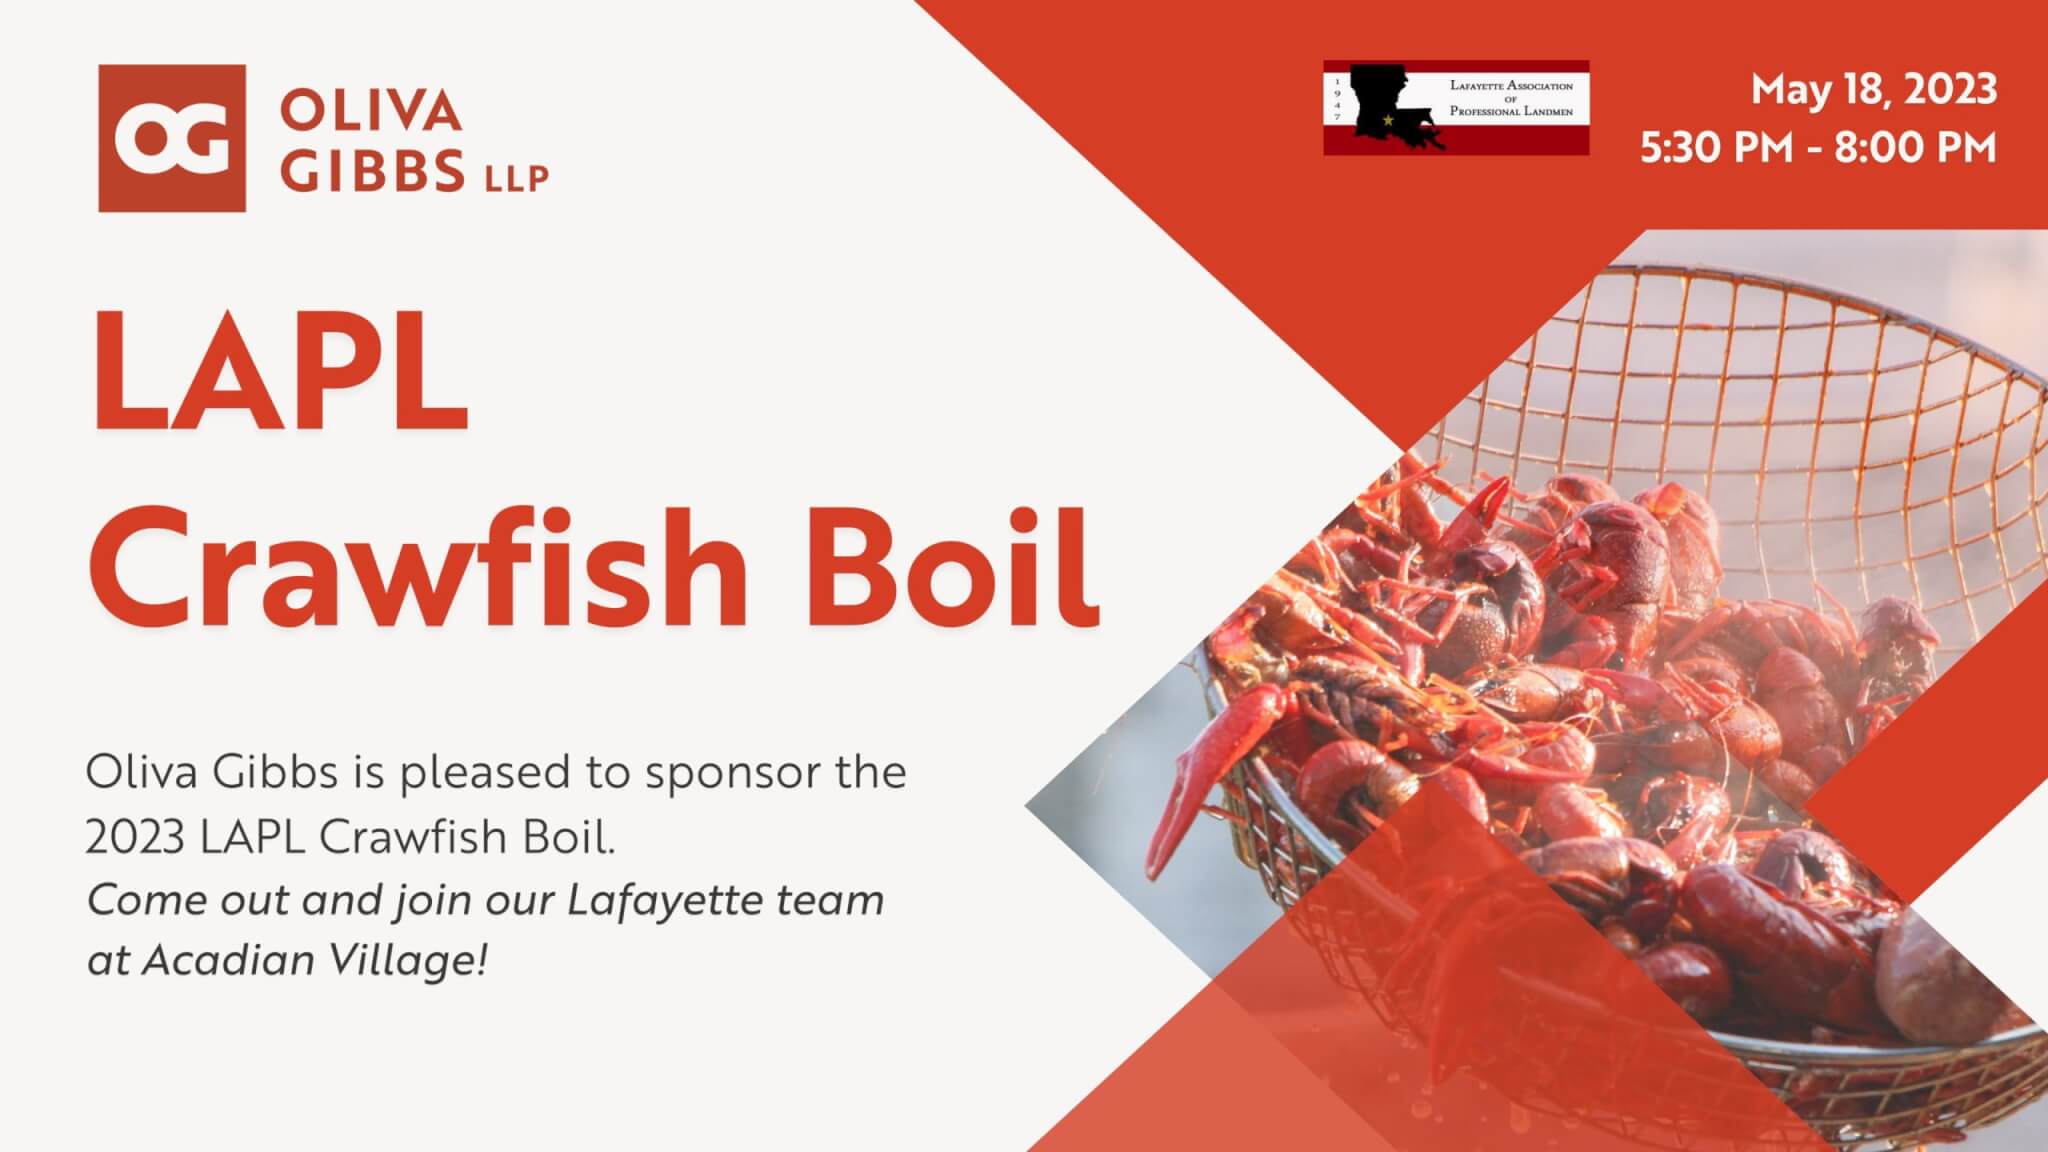 Join Us for the 2023 LAPL Crawfish Boil